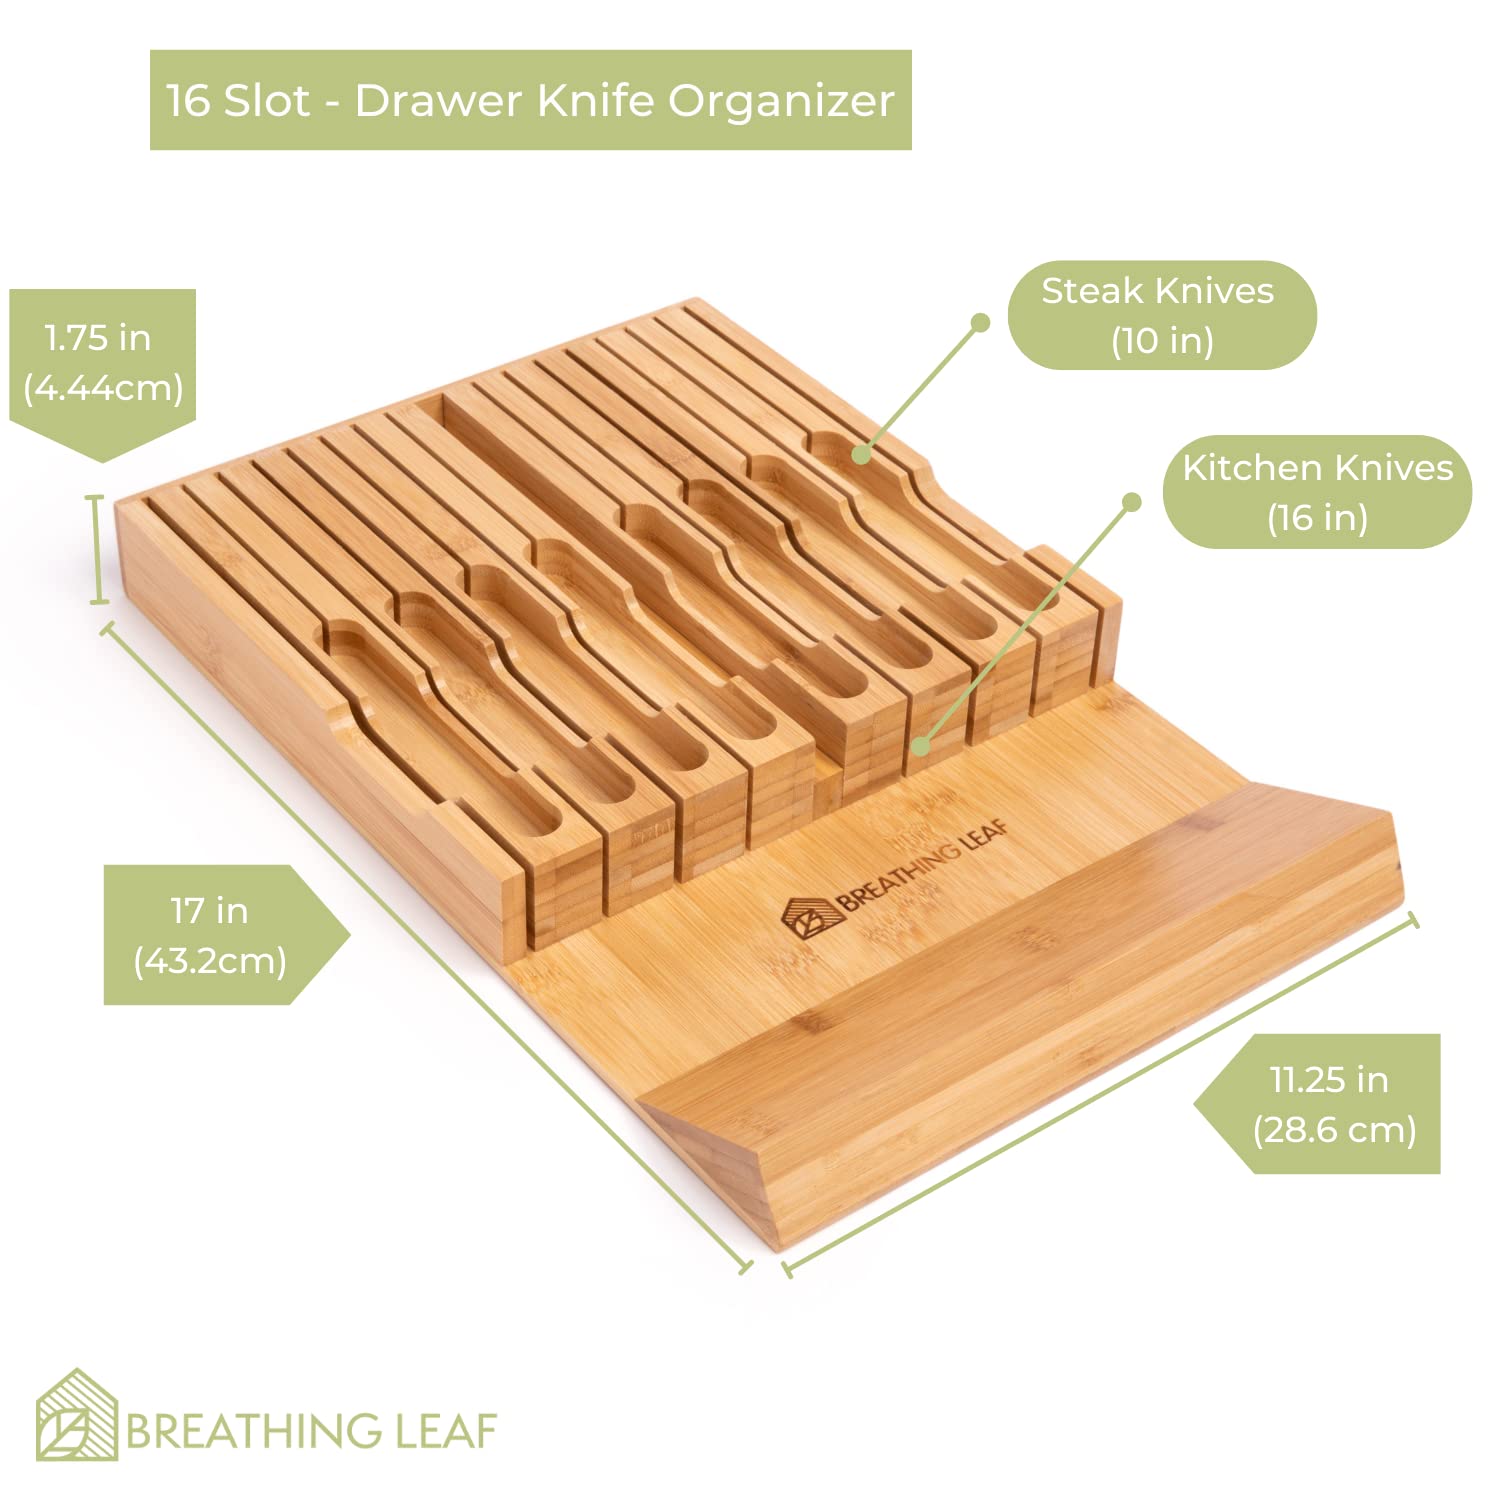 Drawer Knife Organizer - Bamboo Knife Block Insert - Holds 16 Knives + 1 Knife Sharpener (Knives Not Included) - Reliably Store, Secure & Organize Your Kitchen Knives In Cabinet - Free Up Counterspace